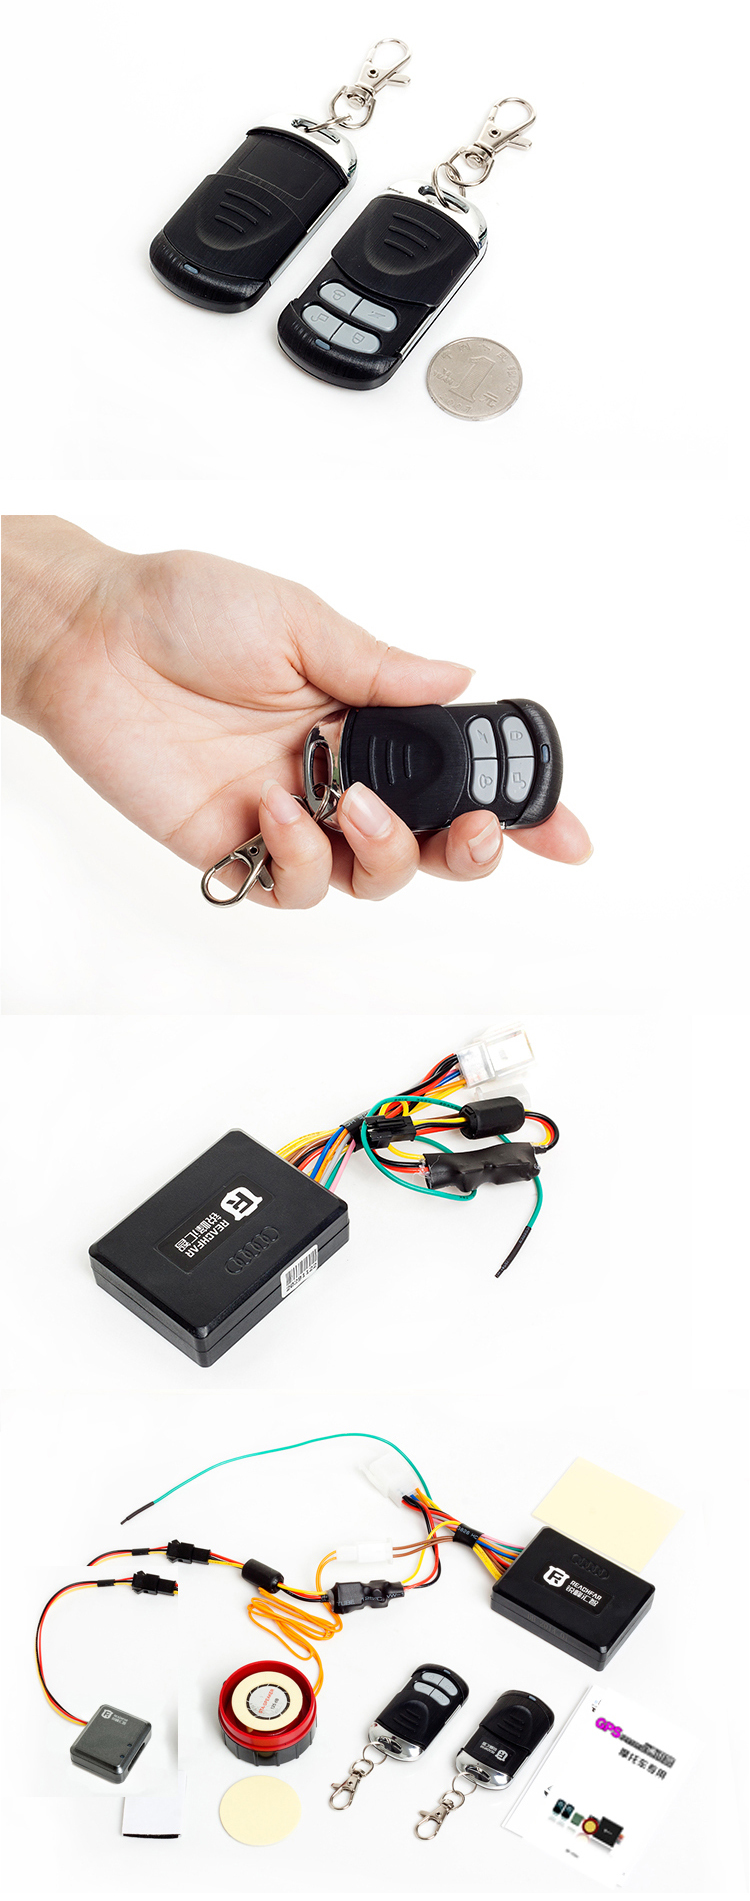 reachfar rf-v10+ motorcycle anti-theft gps tracker with app, free software gps gsm tracking